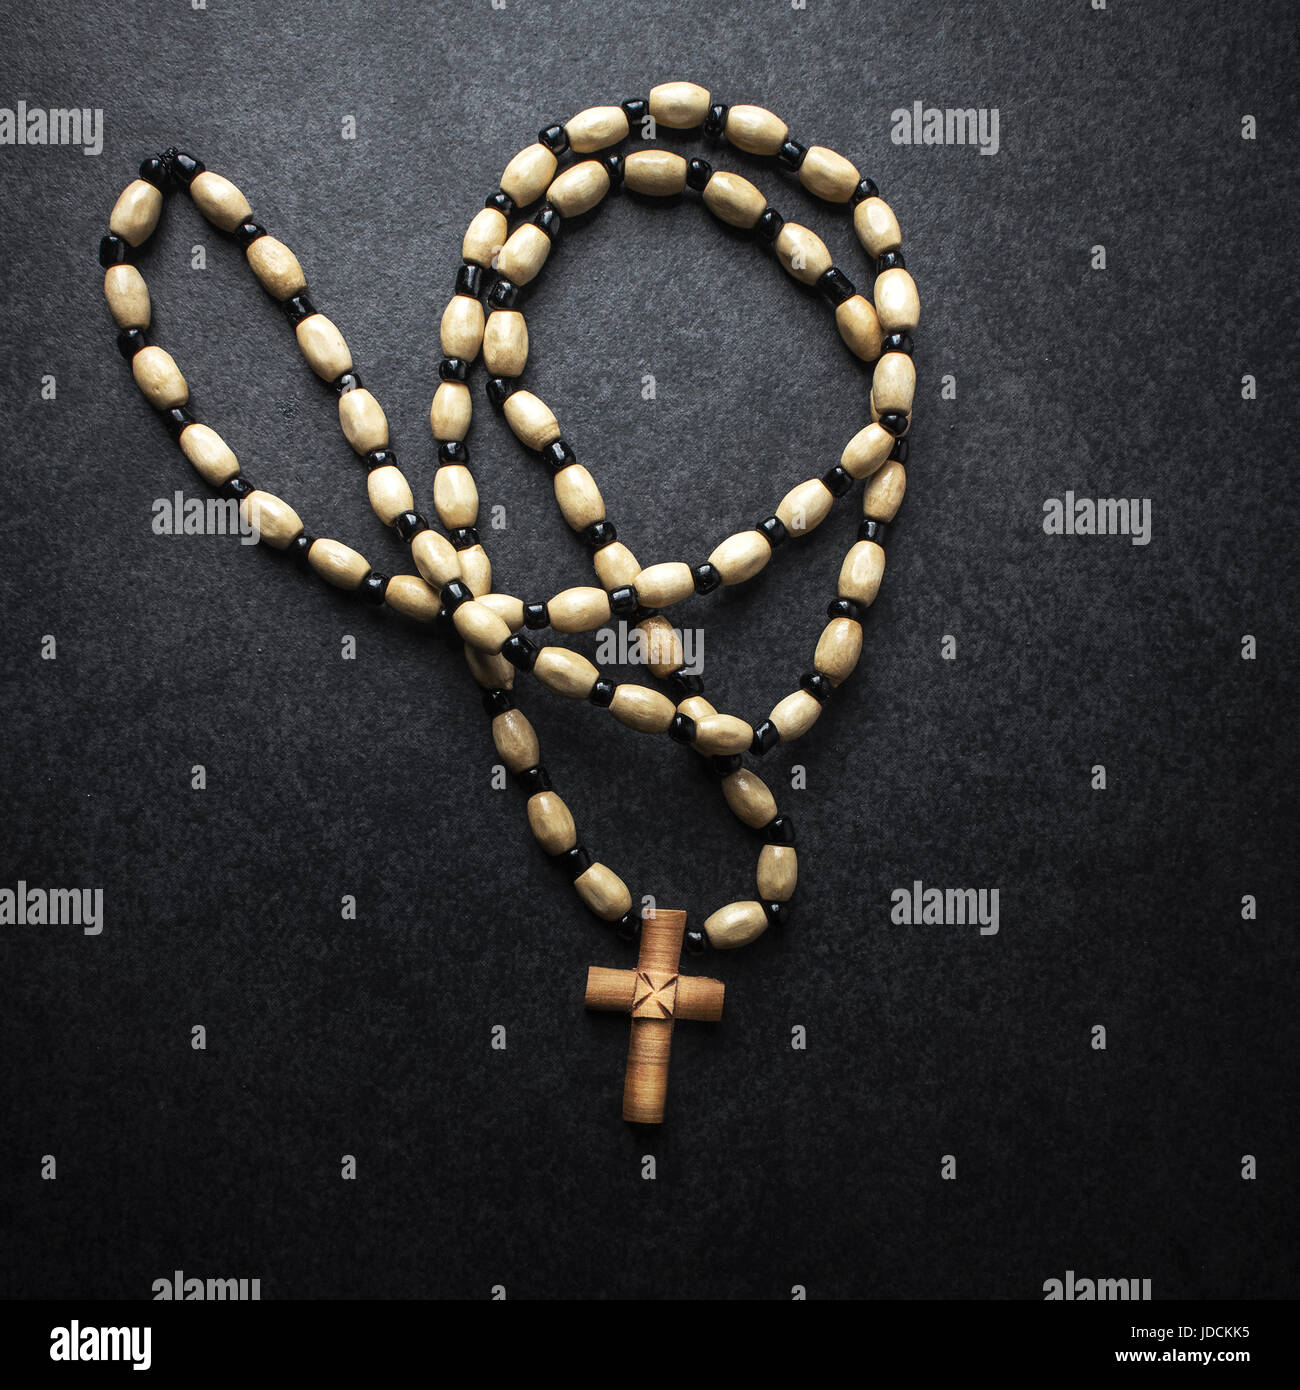 Rosary beads with cross made of wood, from above Stock Photo